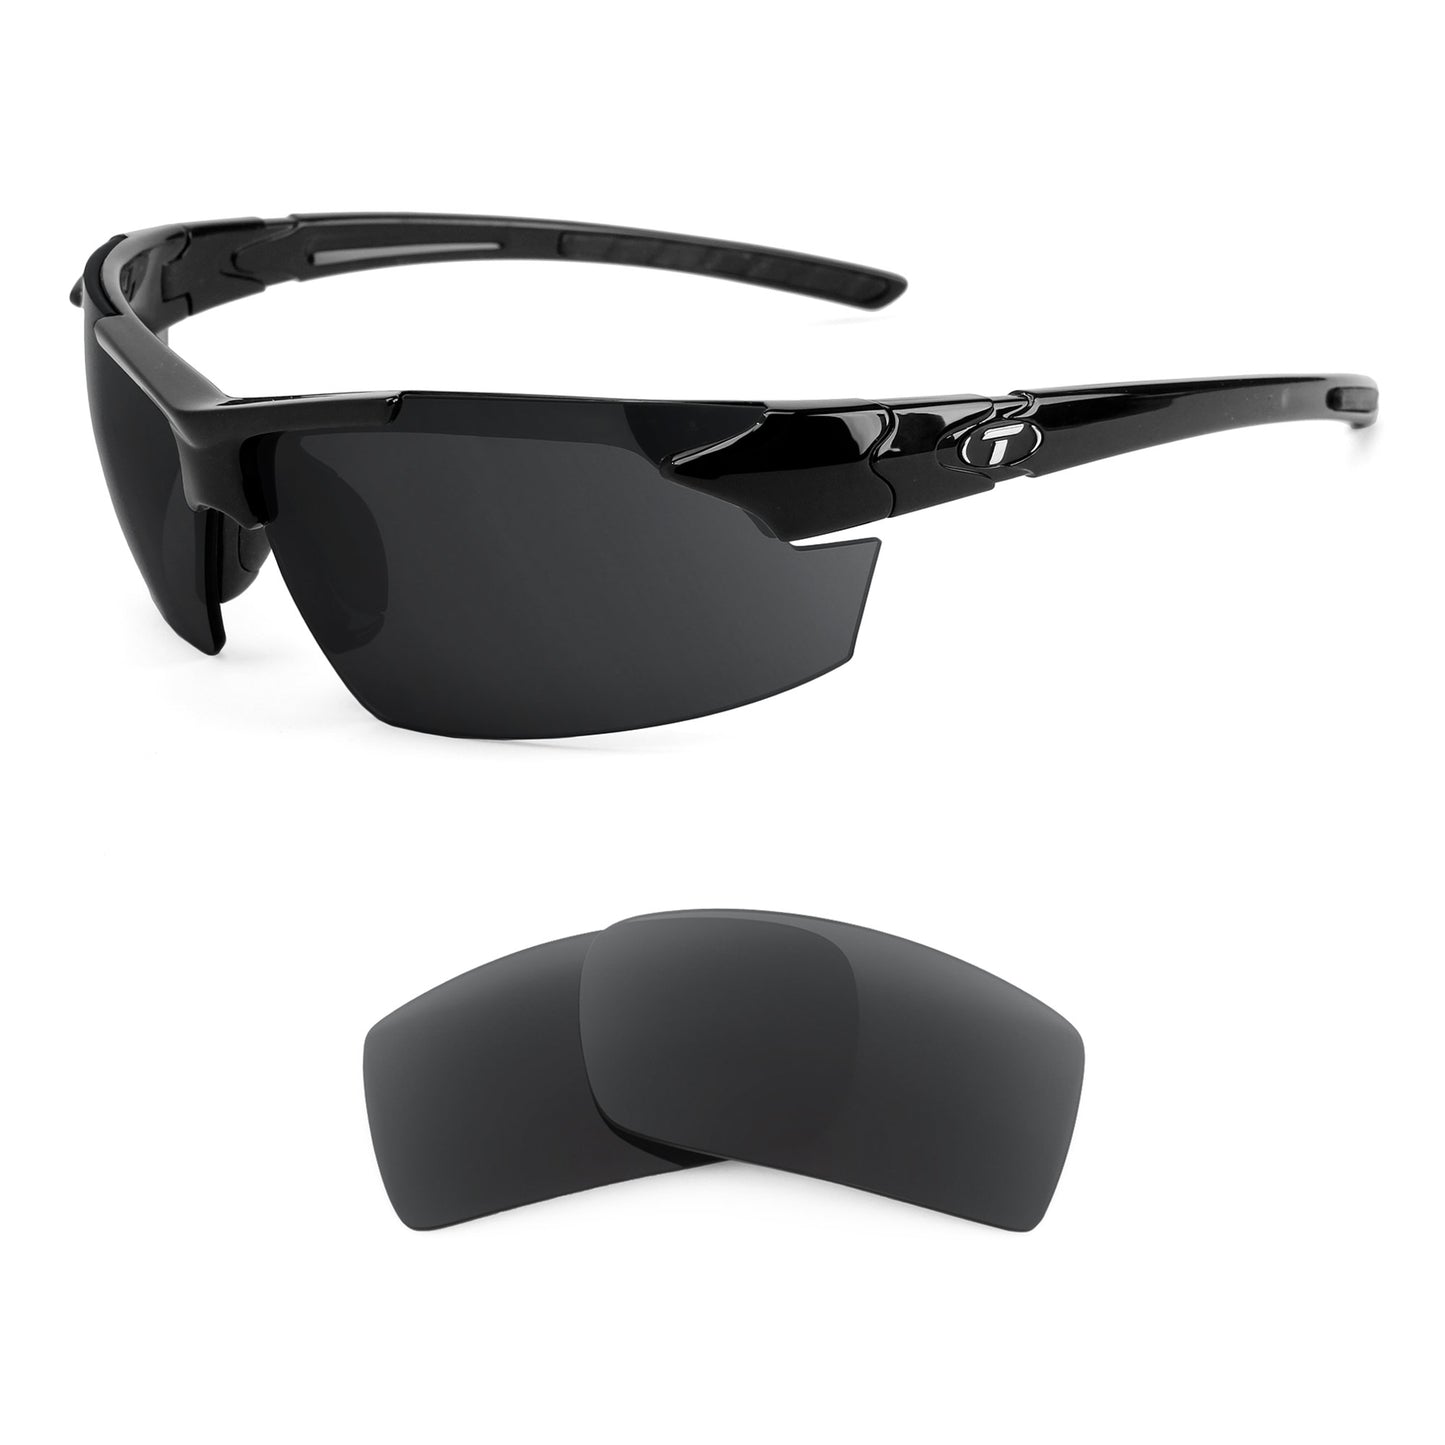 Tifosi Jet FC sunglasses with replacement lenses